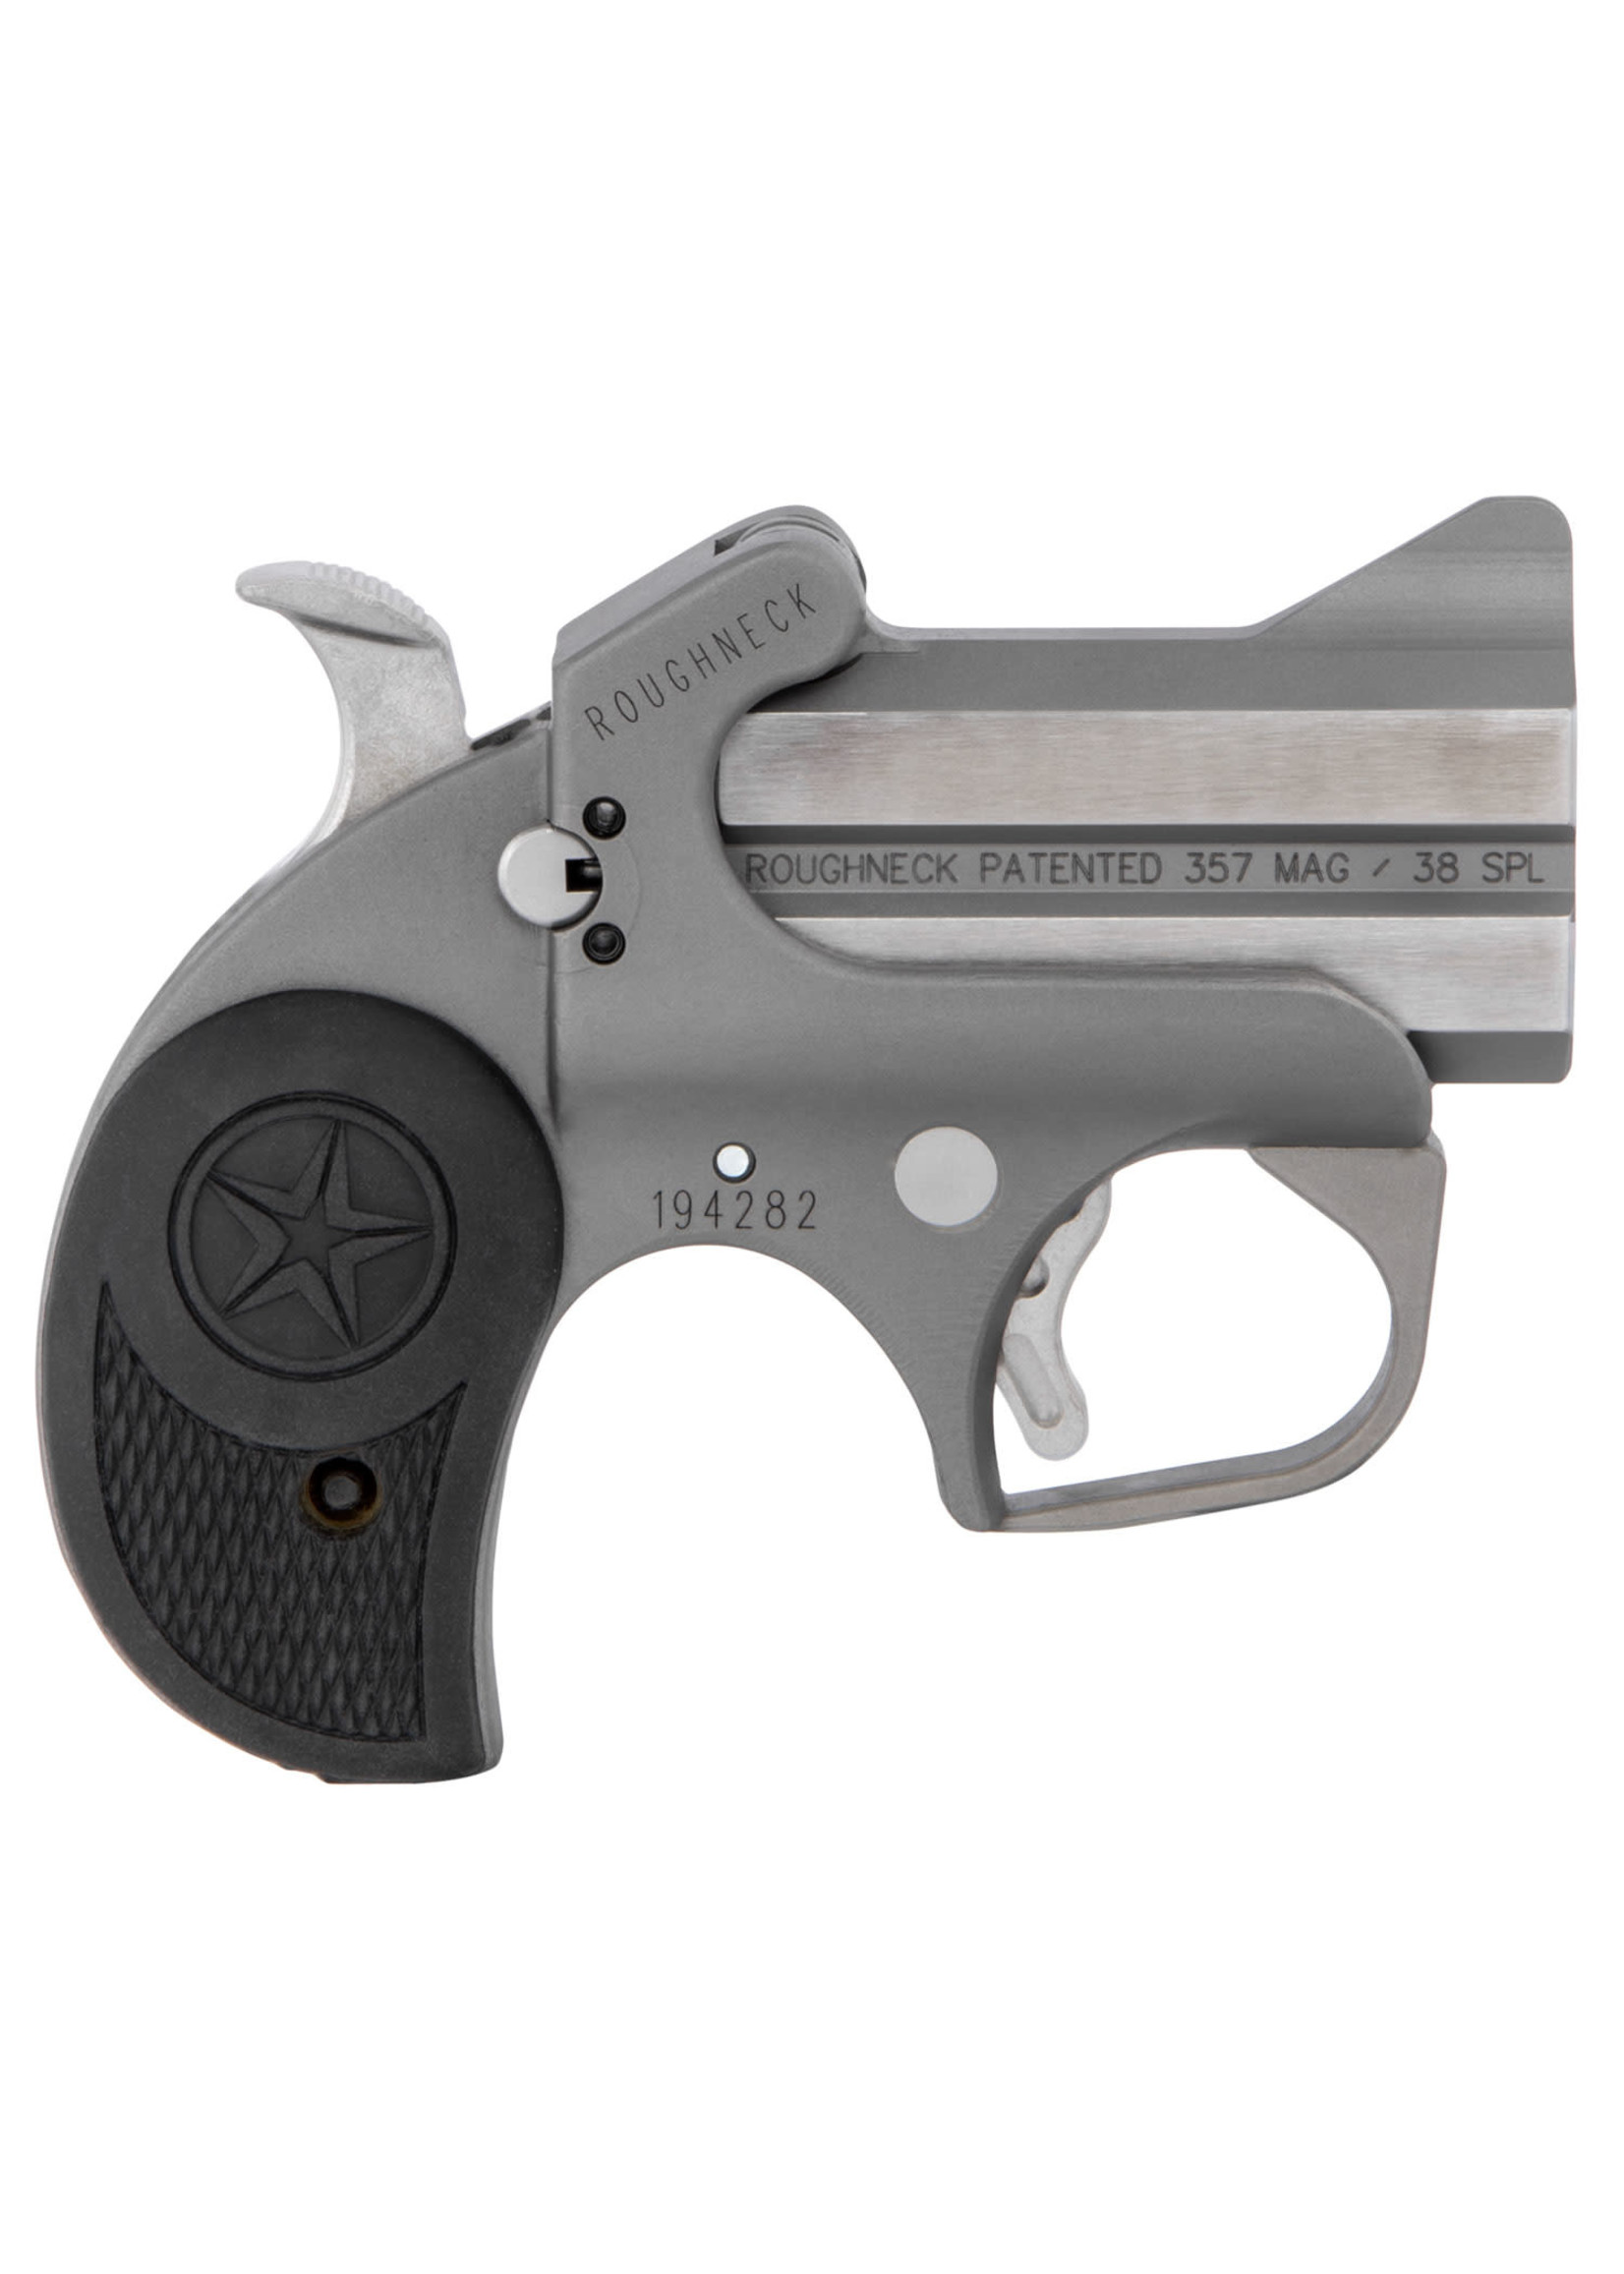 Bond Arms Bond Arms Roughneck 38 Special 357 Mag 2.50" 2 Round Stainless Steel